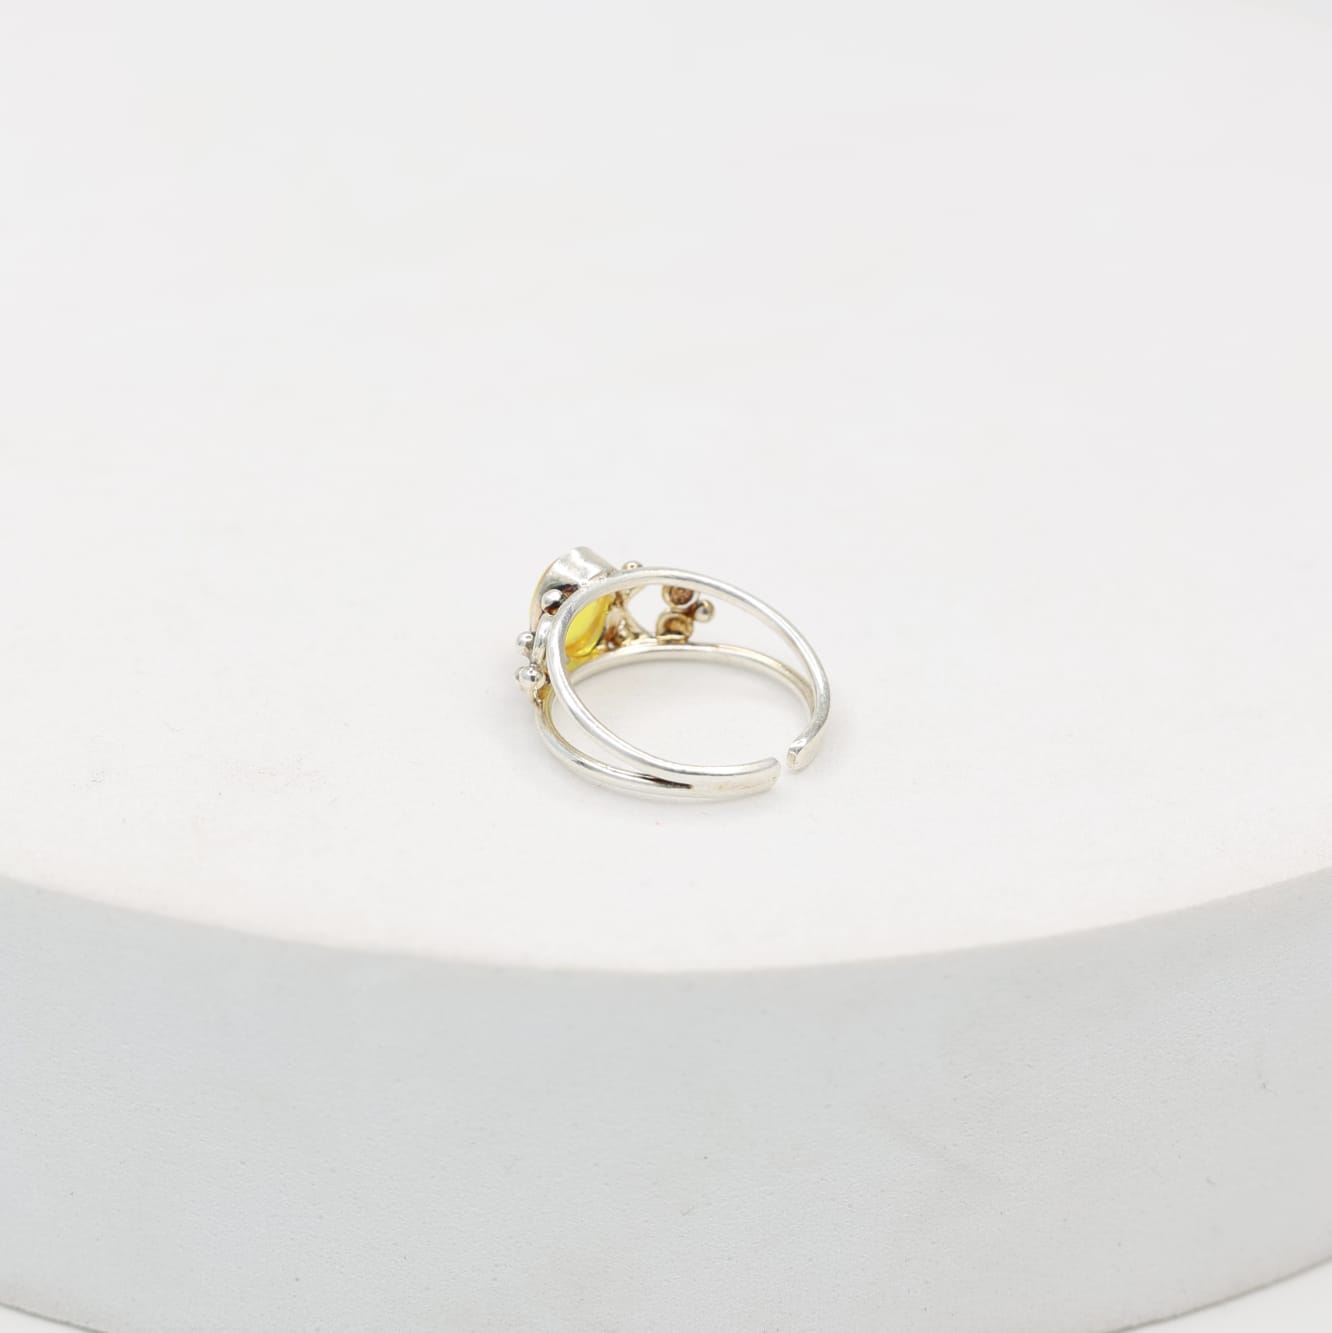 Yellow Quartz stone ring set in sterling Silver.